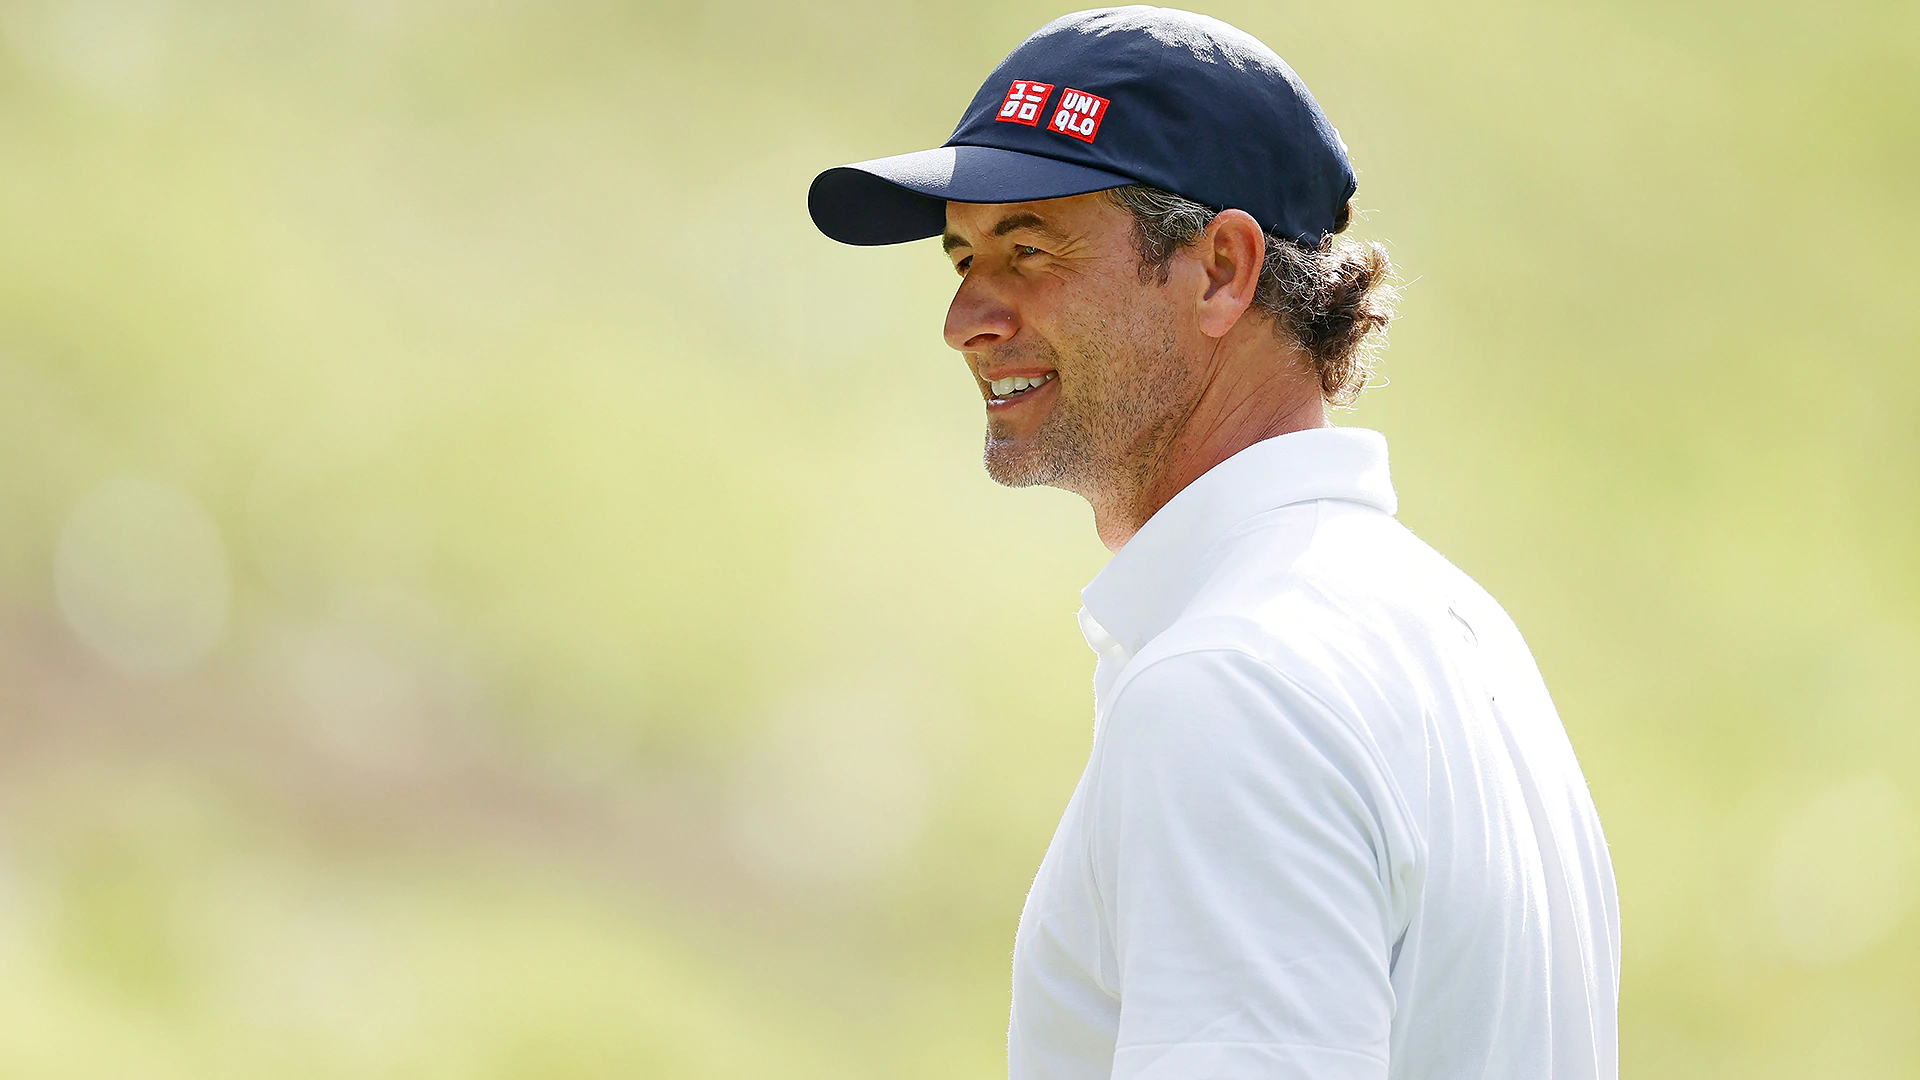 Adam Scott opts out of Summer Olympics again, according to manager